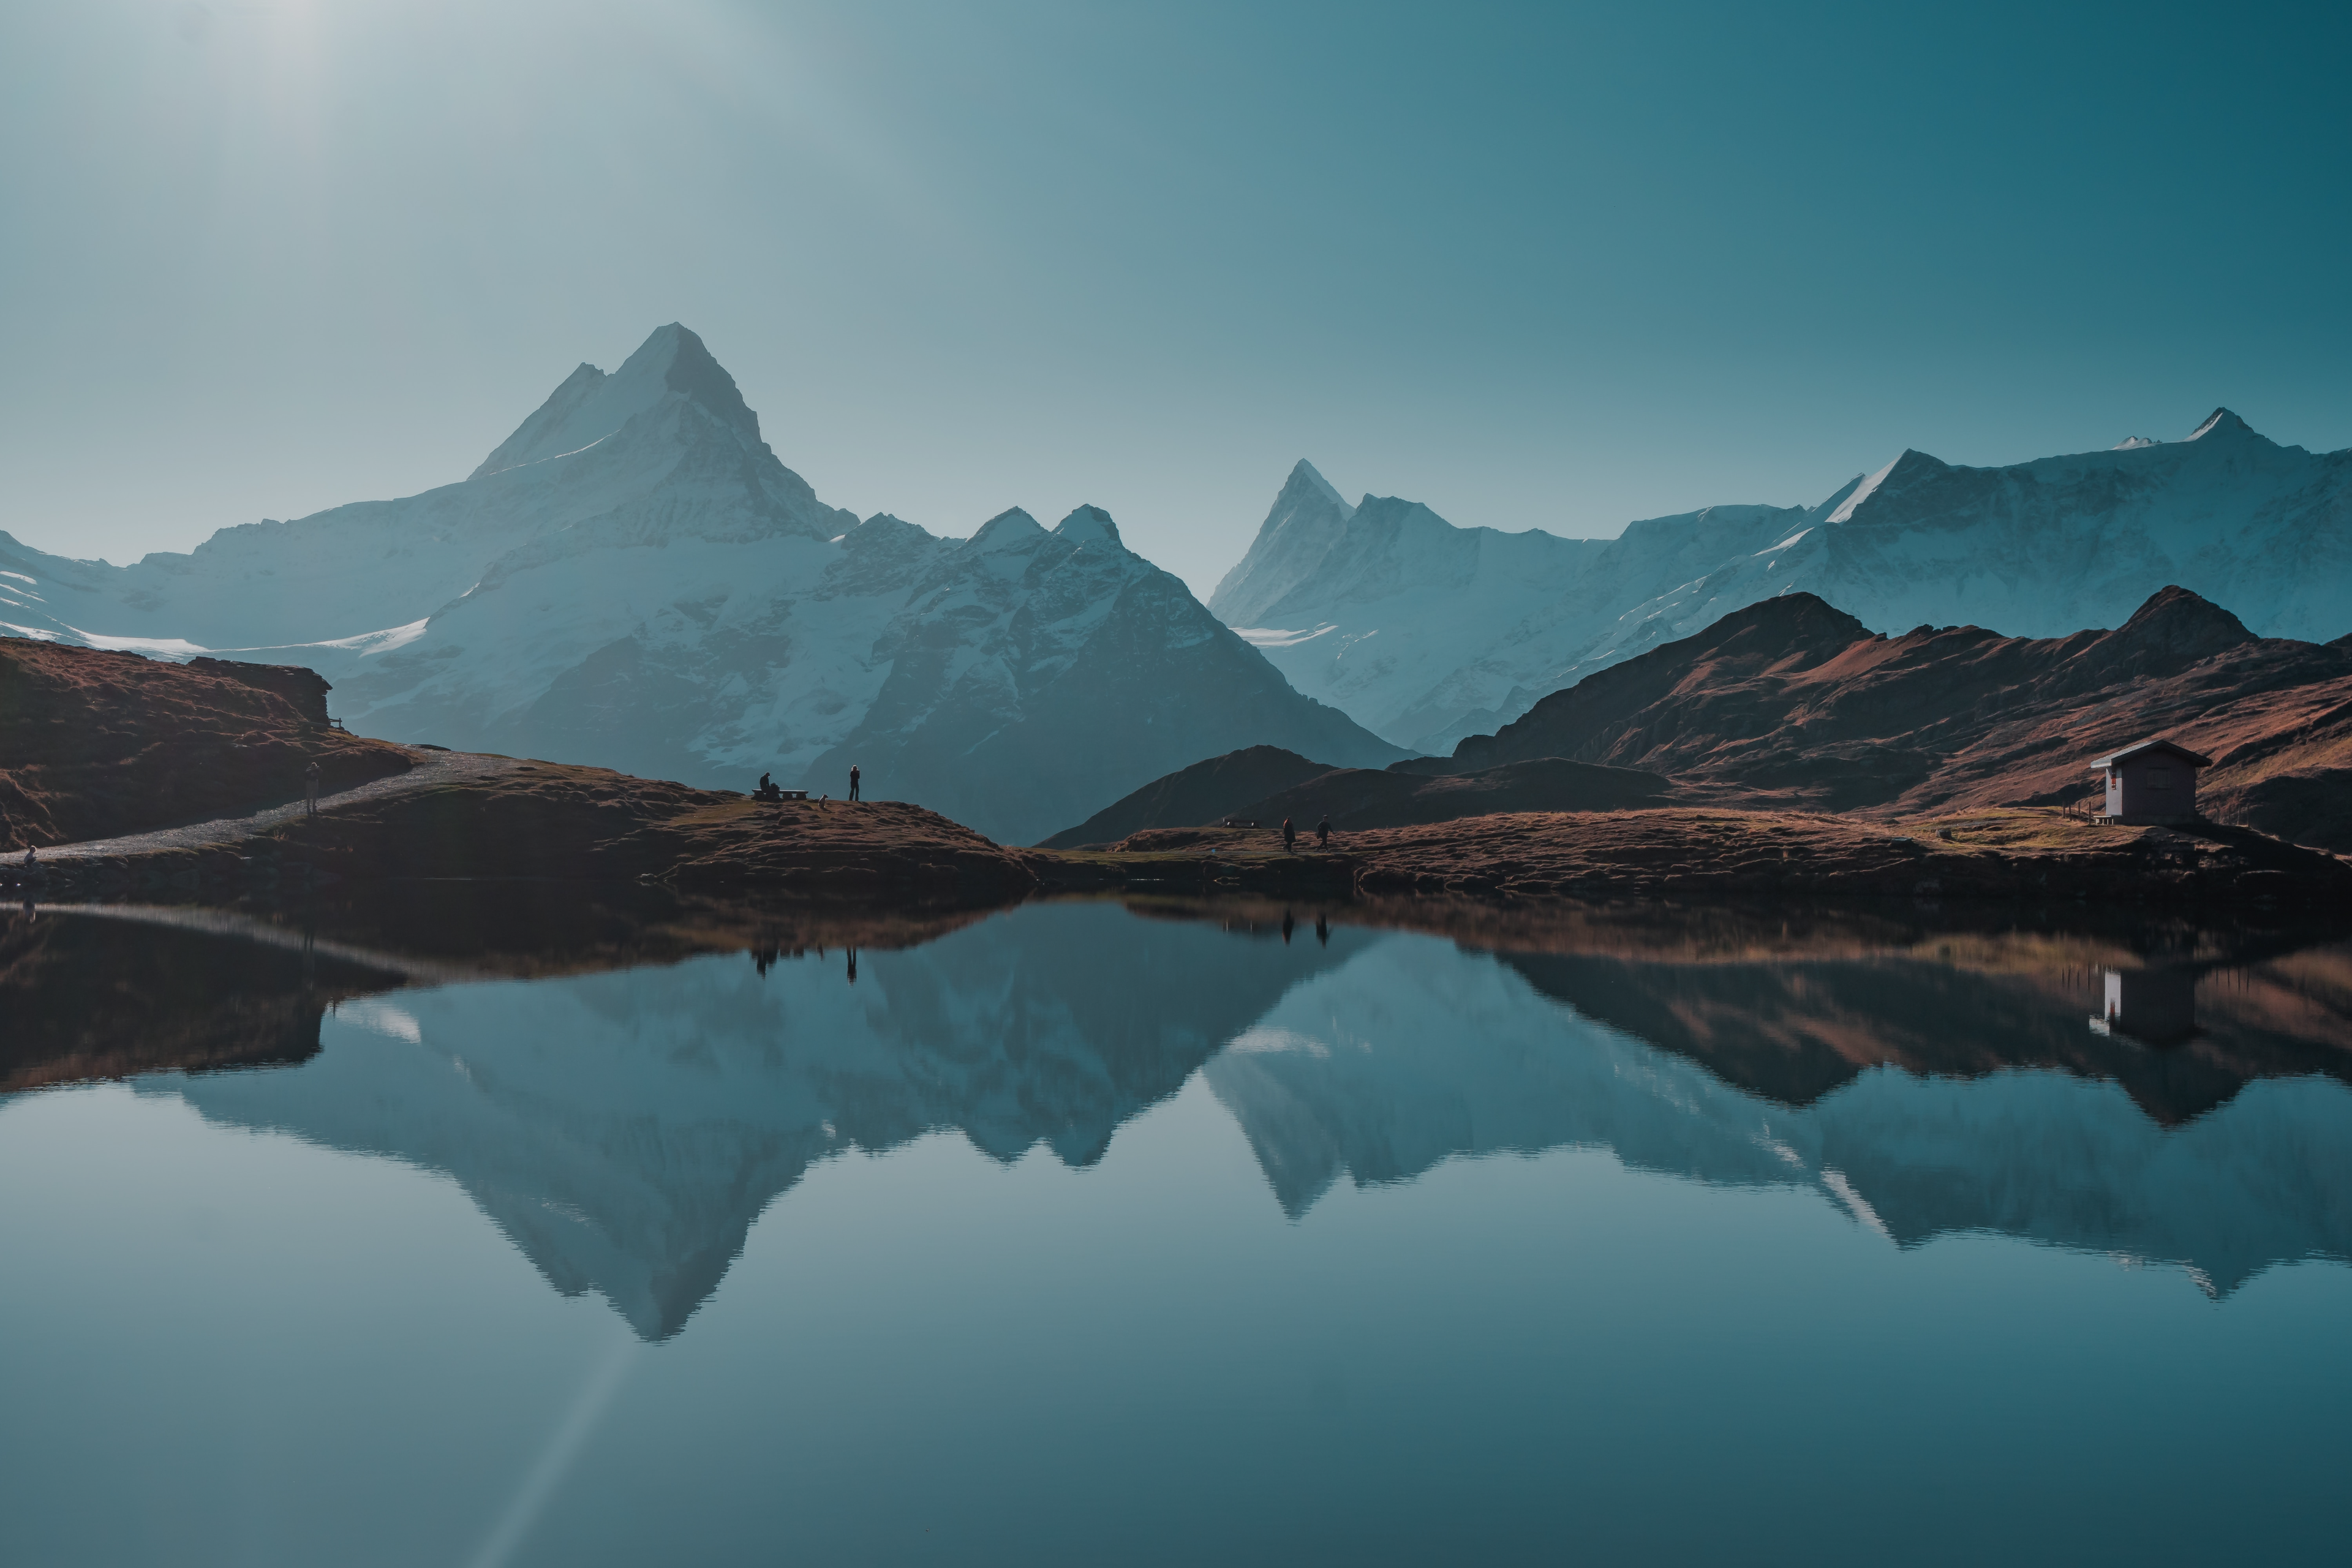 background image of mountains